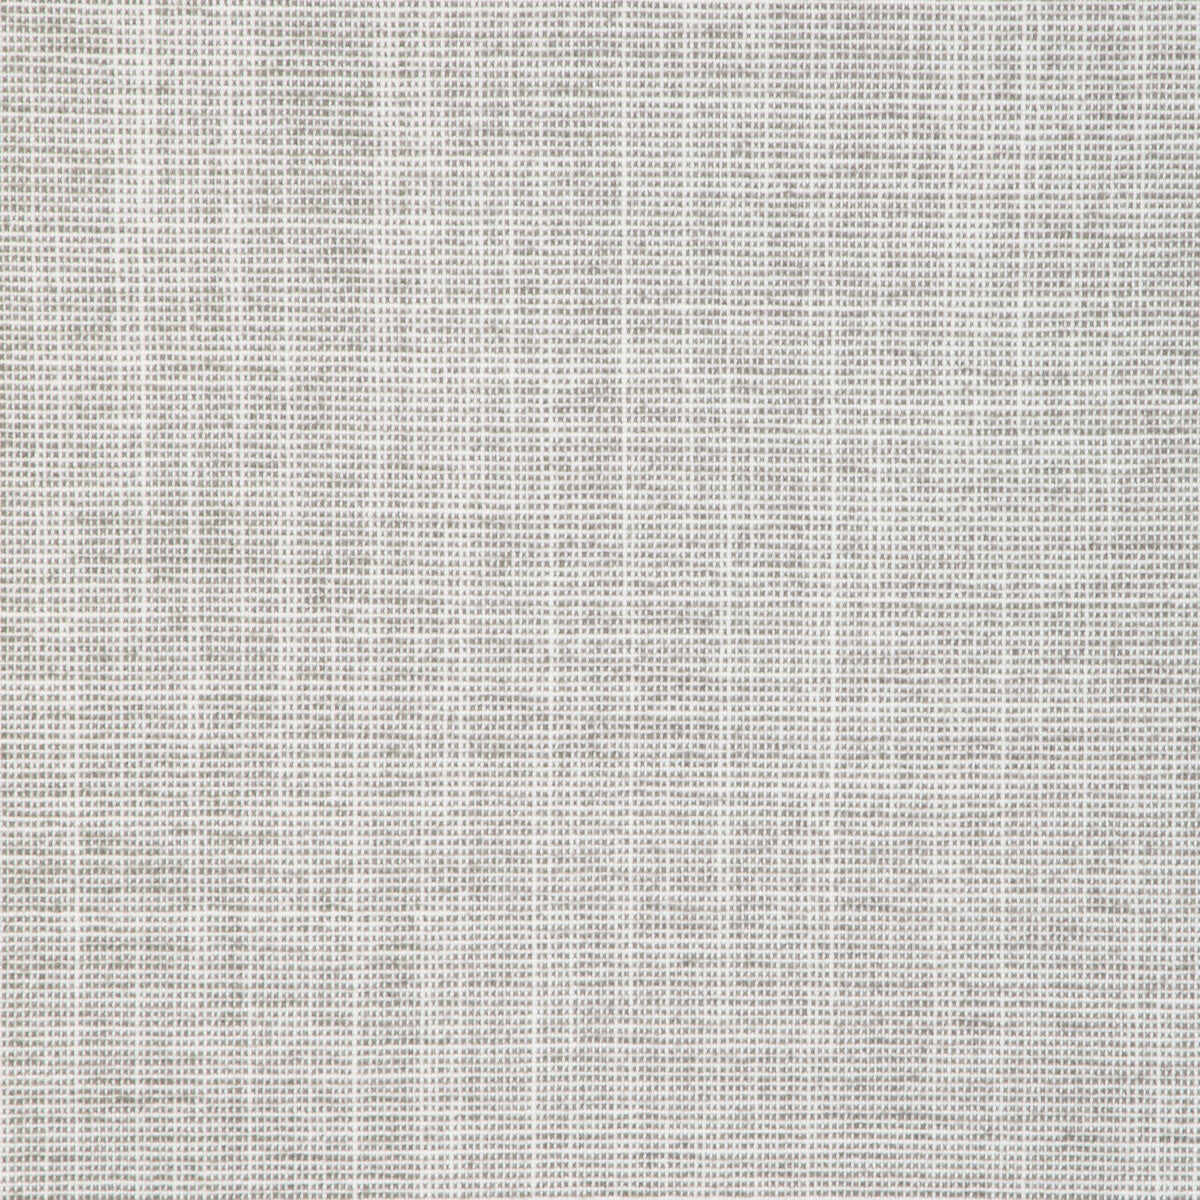 Catalonia fabric in driftwood color - pattern 36926.11.0 - by Kravet Couture in the Riviera collection